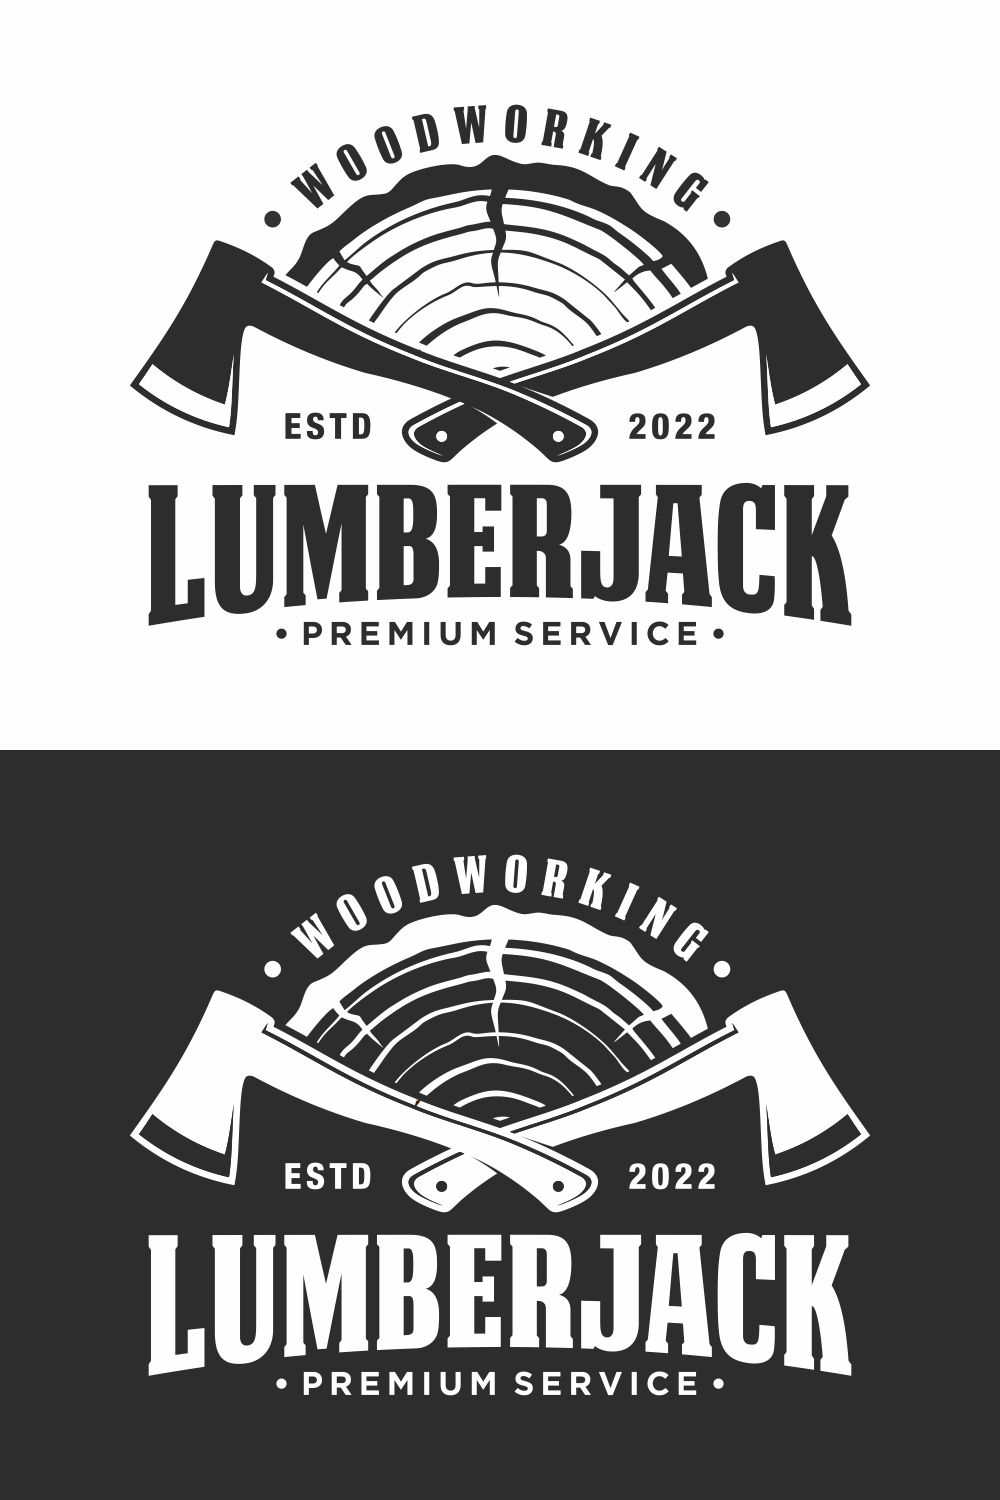 woodcutter logo design, badge, label or logo in vintage style – Only $6 pinterest preview image.